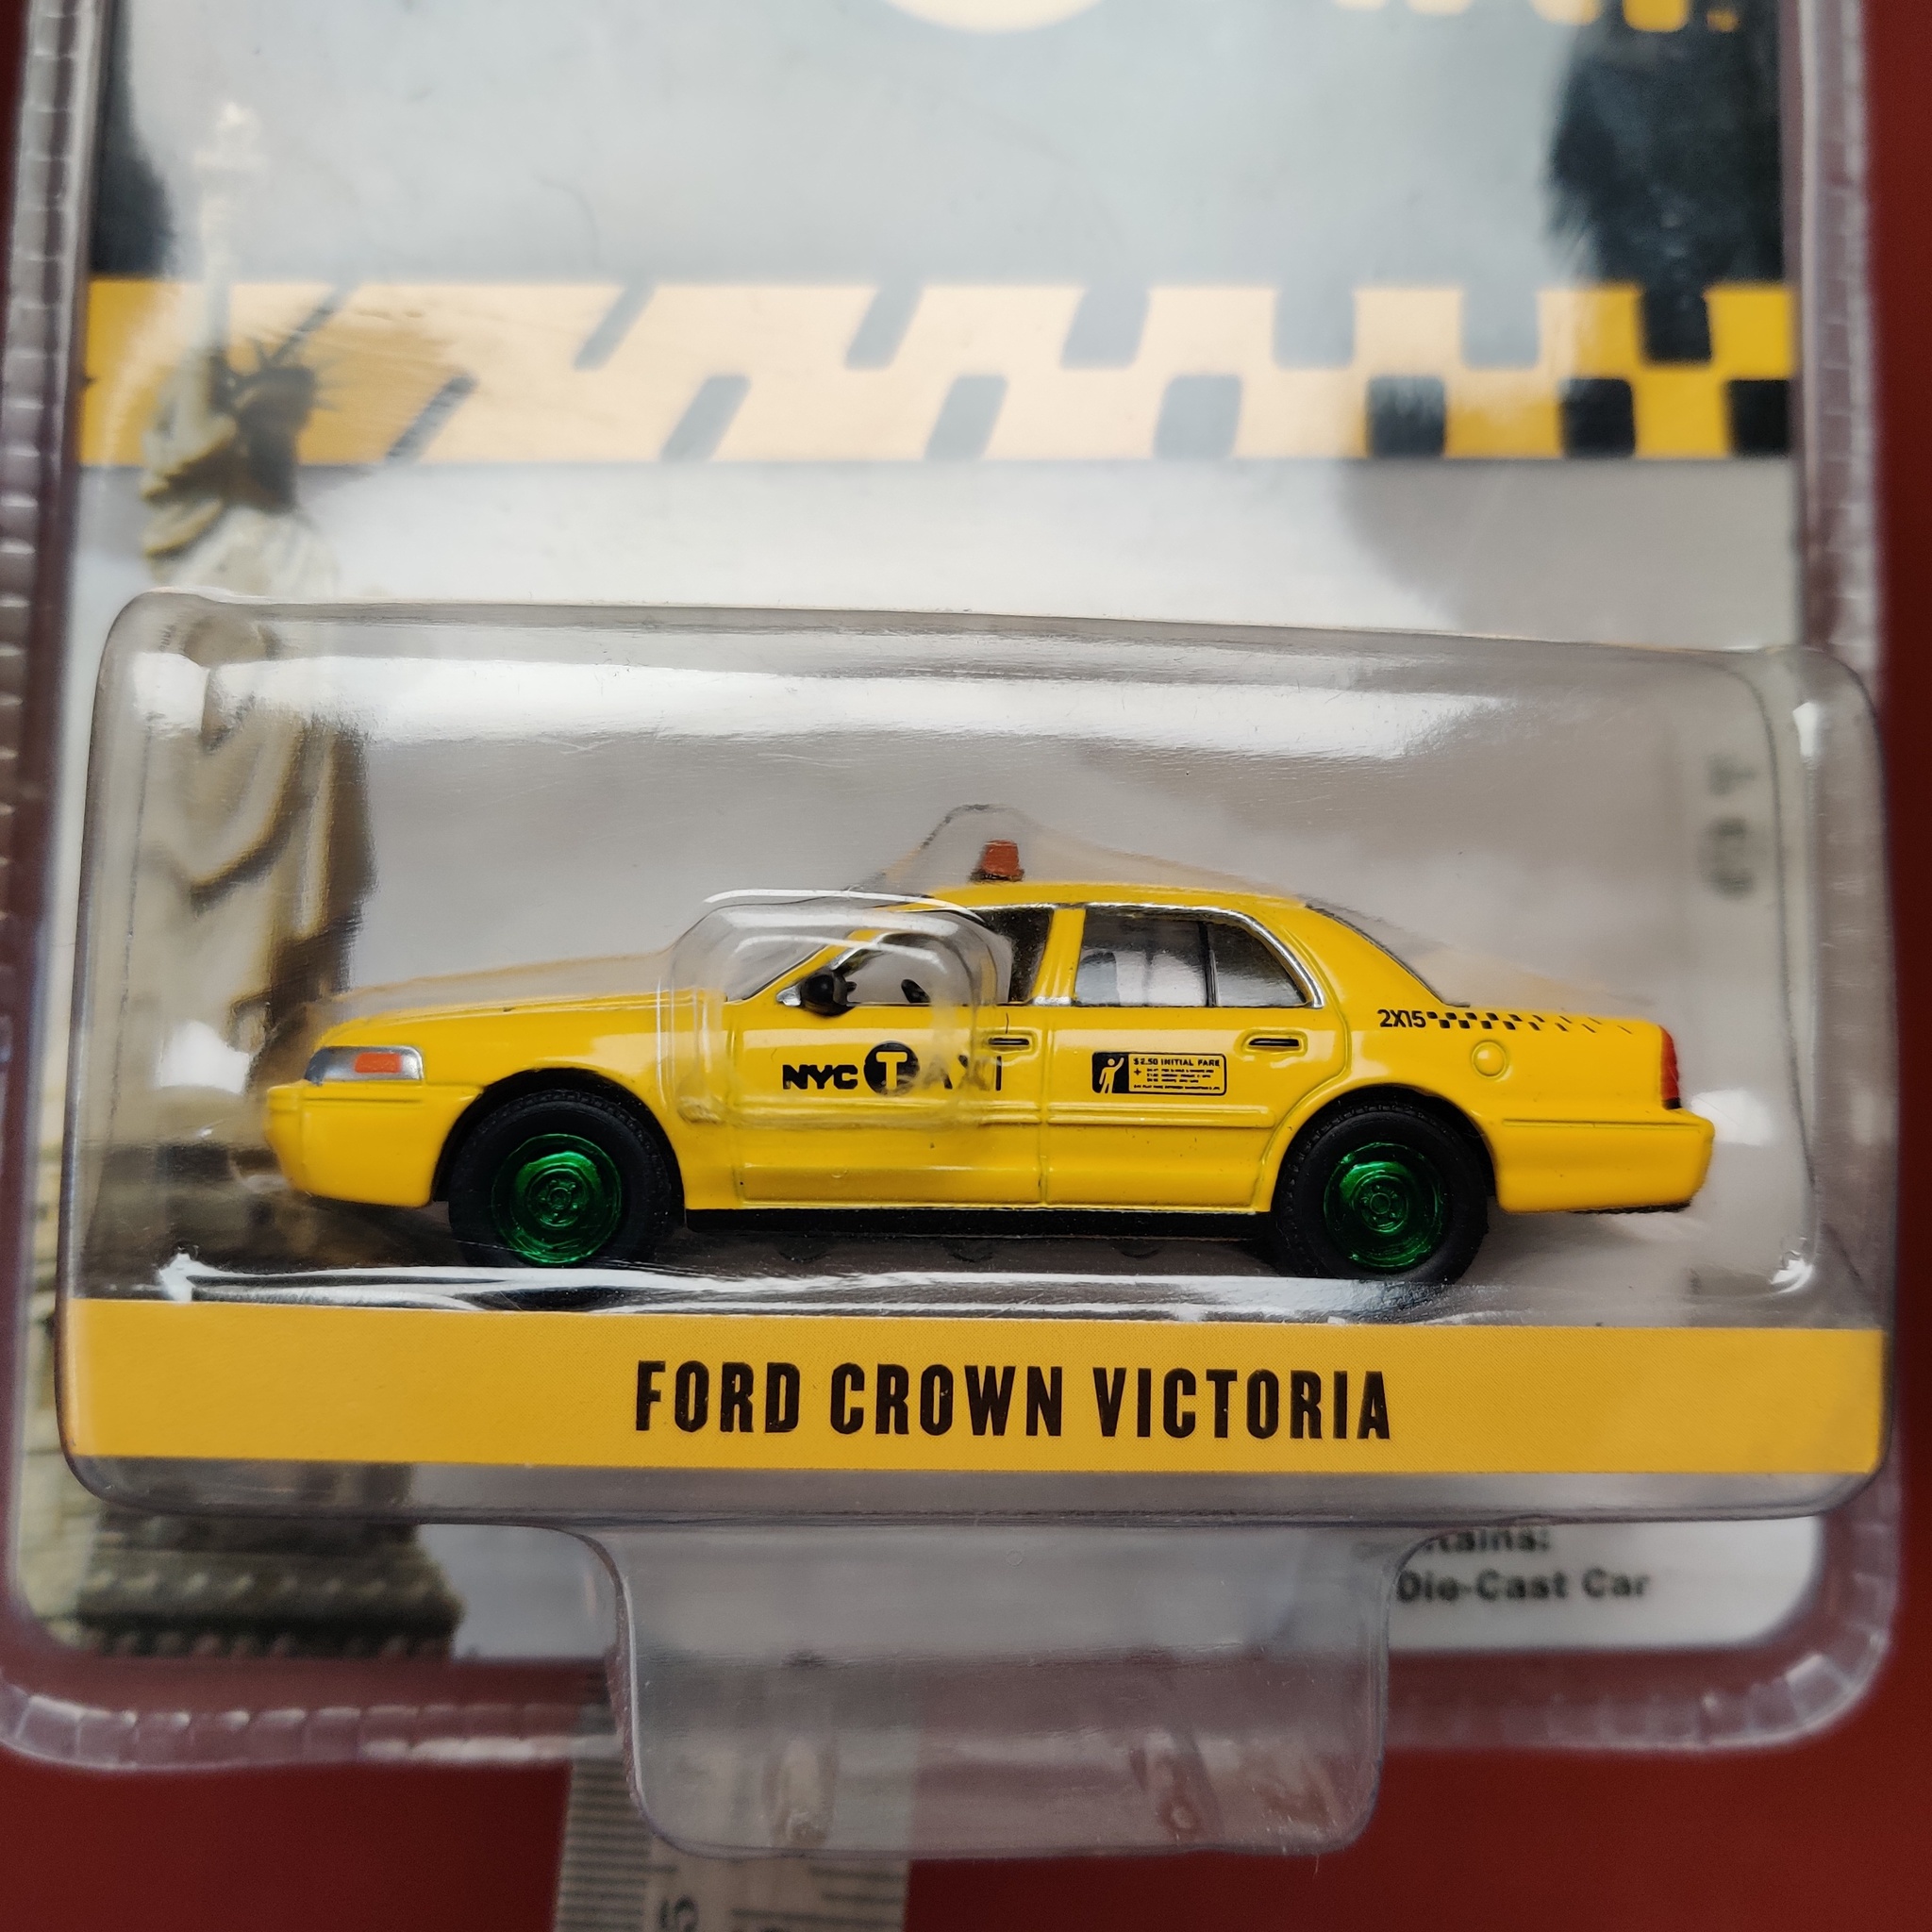 Skala 1/64 Ford Crown Victoria "NYC TAXI" från Greenlight Excl.